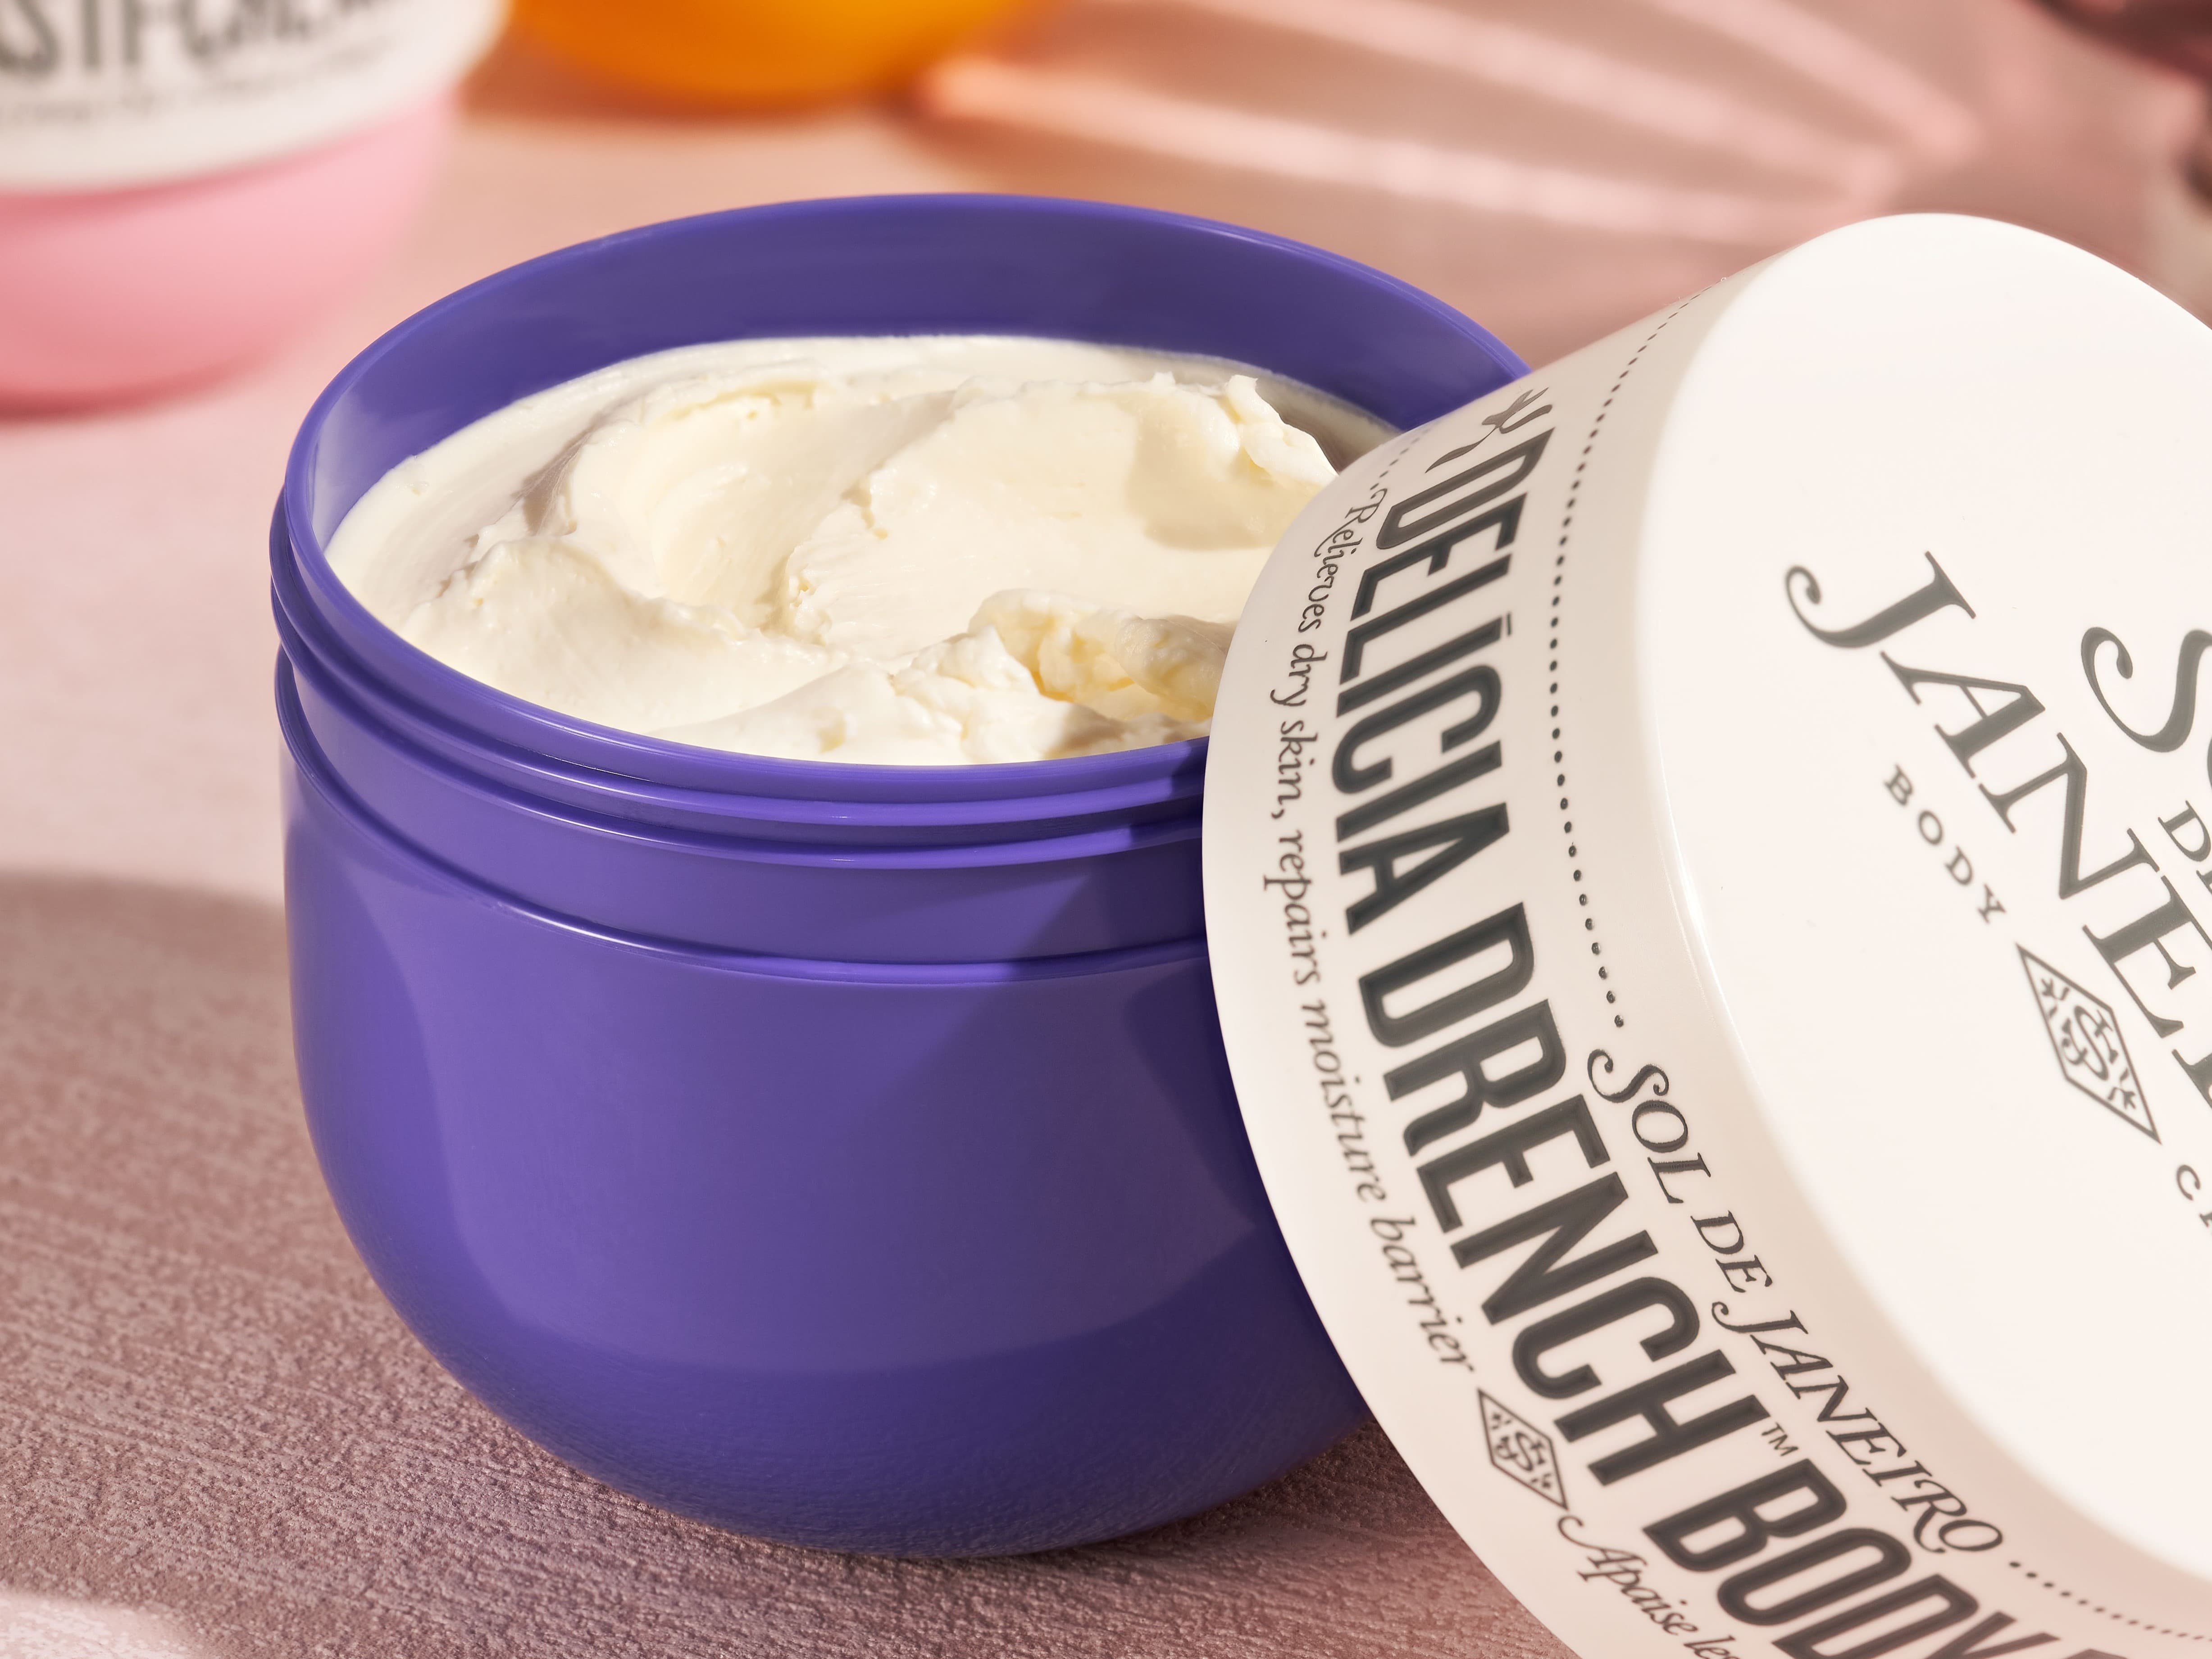 Sol de Janeiro Delicia Drench Body Butter review | Space NK